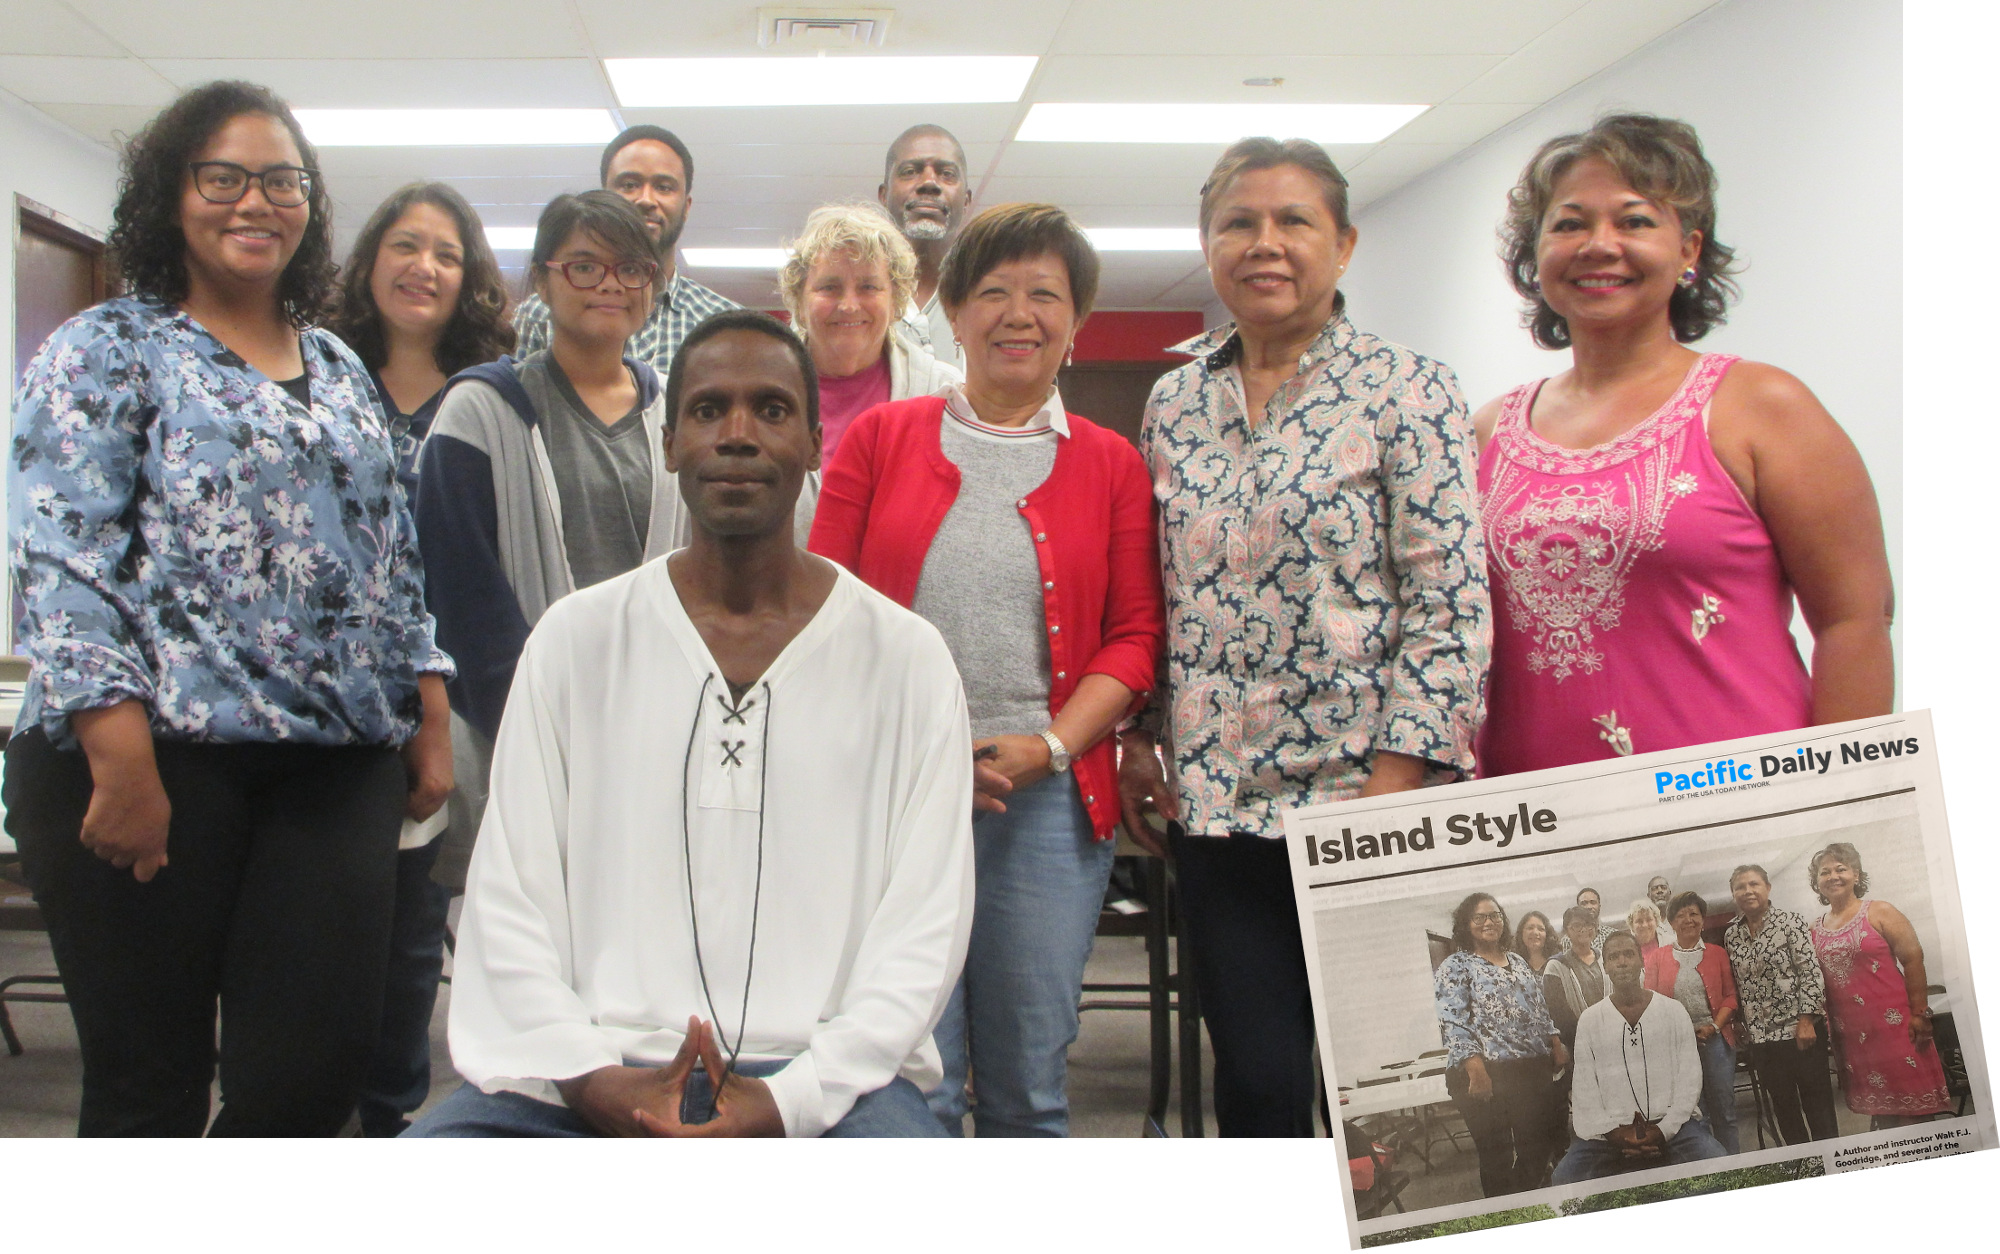 Author and instructor Walt F.J. Goodridge, and several of the attendees of Guam's First Writers Workshop: l.to r. Fadila K., Marie L., Sophie N., Tyrone B., Dianne S., Christopher A., Jeni Ann F., Kim B. and Dr.Sam M. (Not shown: Rlene S. and Louise.) [inset: Photo appears in the July 31 edition of Pacific Daily News' Island Style section a few days later!]